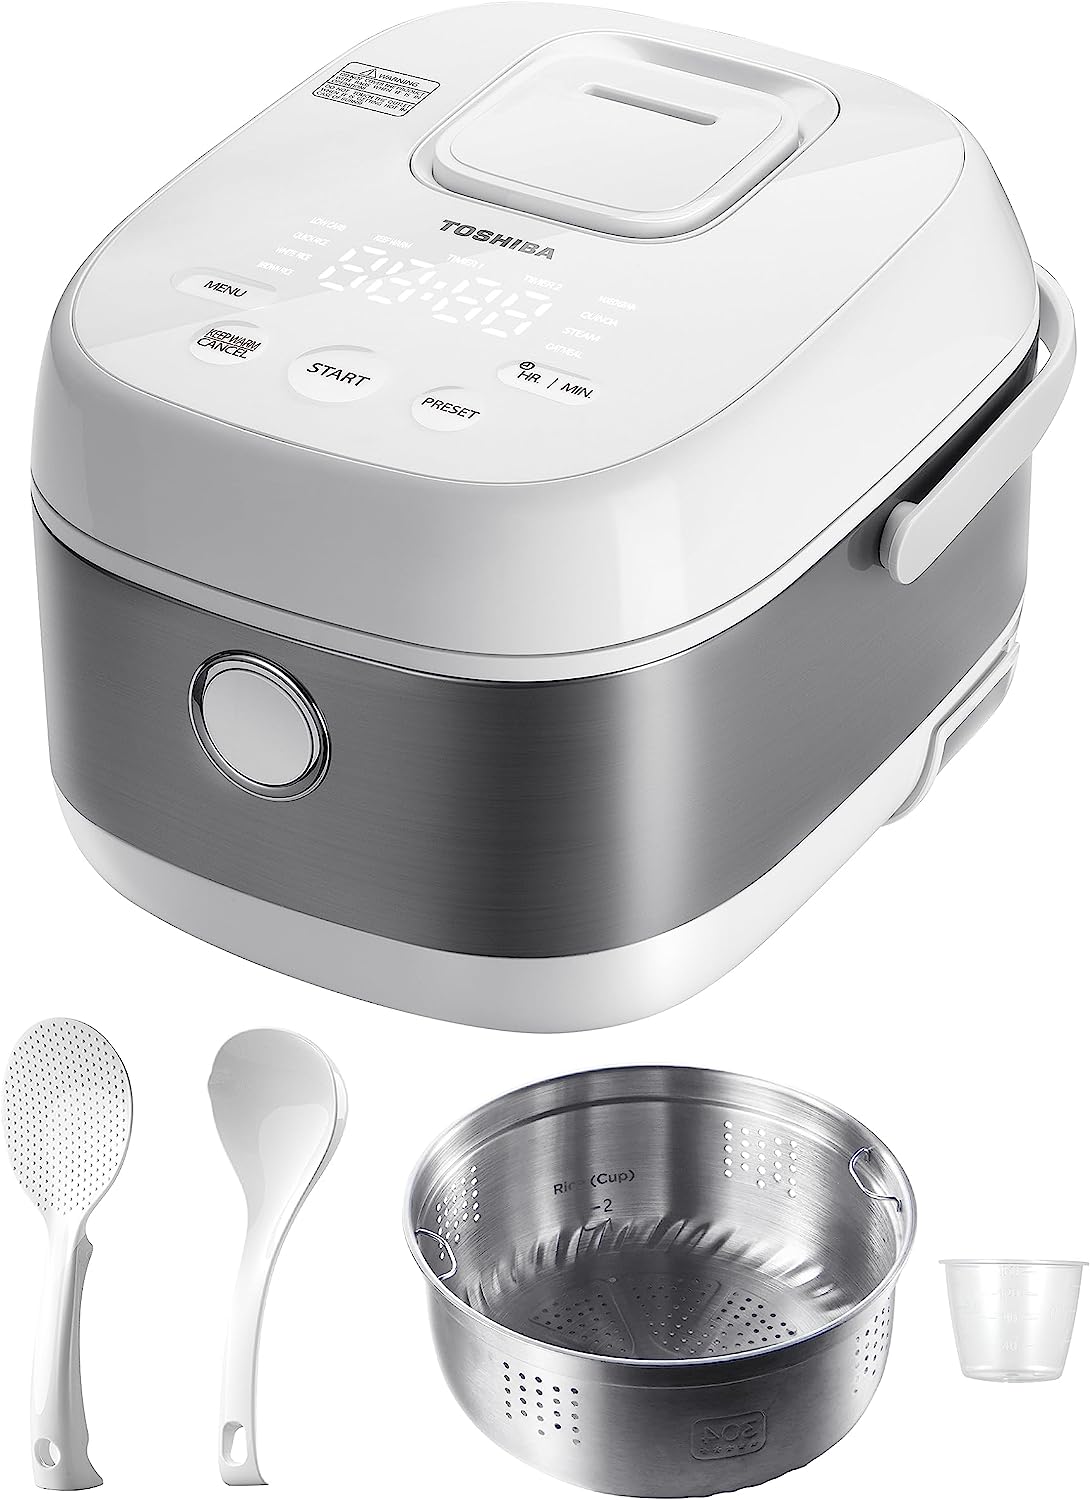 Fuzzy Logic 5-Cup White Rice Cooker